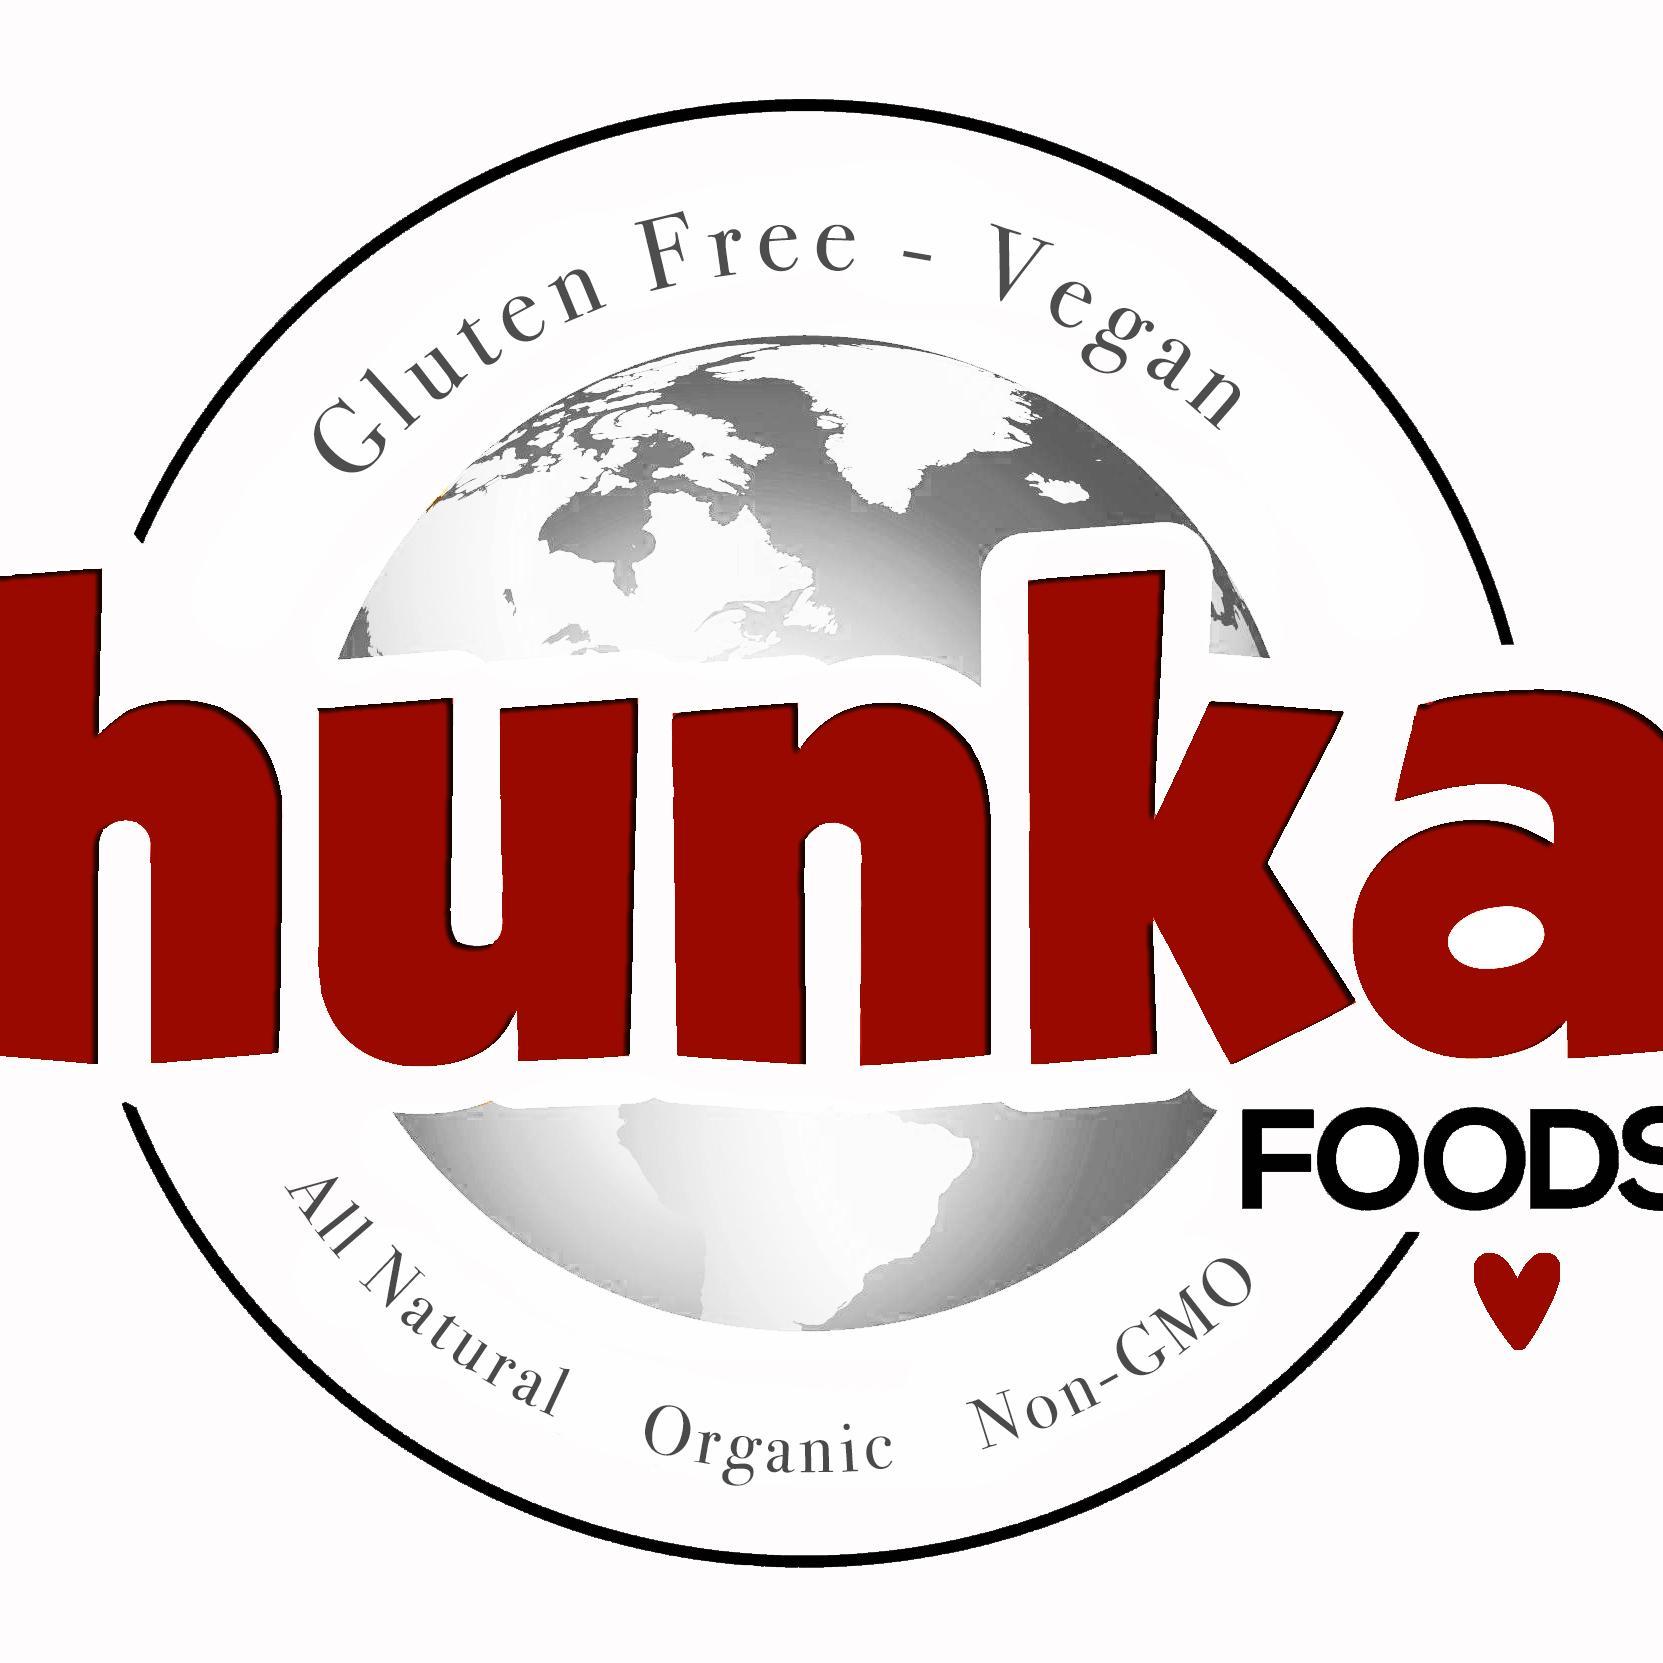 Snack Food Production: #GlutenFree, #Vegan #Vegetarian, #Paleo #Healthy, #Organic #Allnatural, #nonGMO. Socially and ecologically #responsible